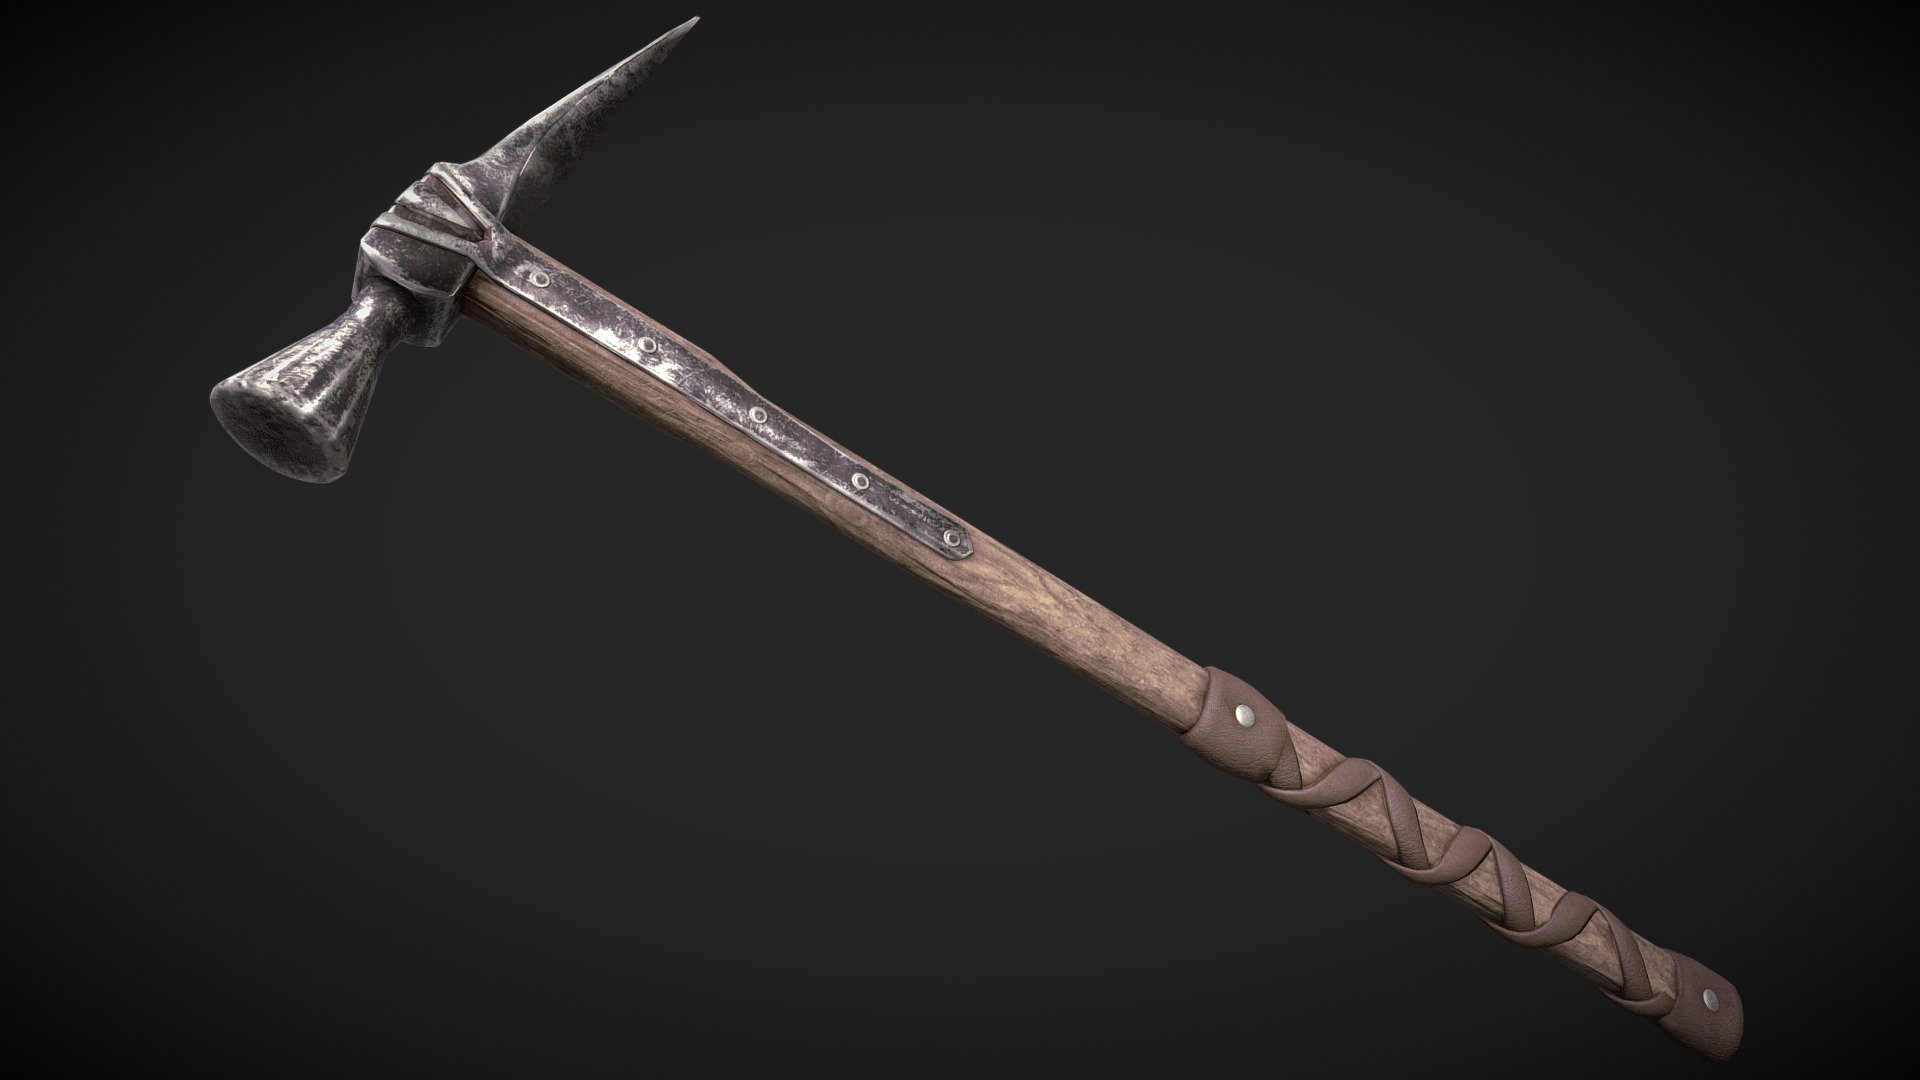 Medieval war hammer made with blender 2.90.1 and substance painter for first person medieval combat 3d model